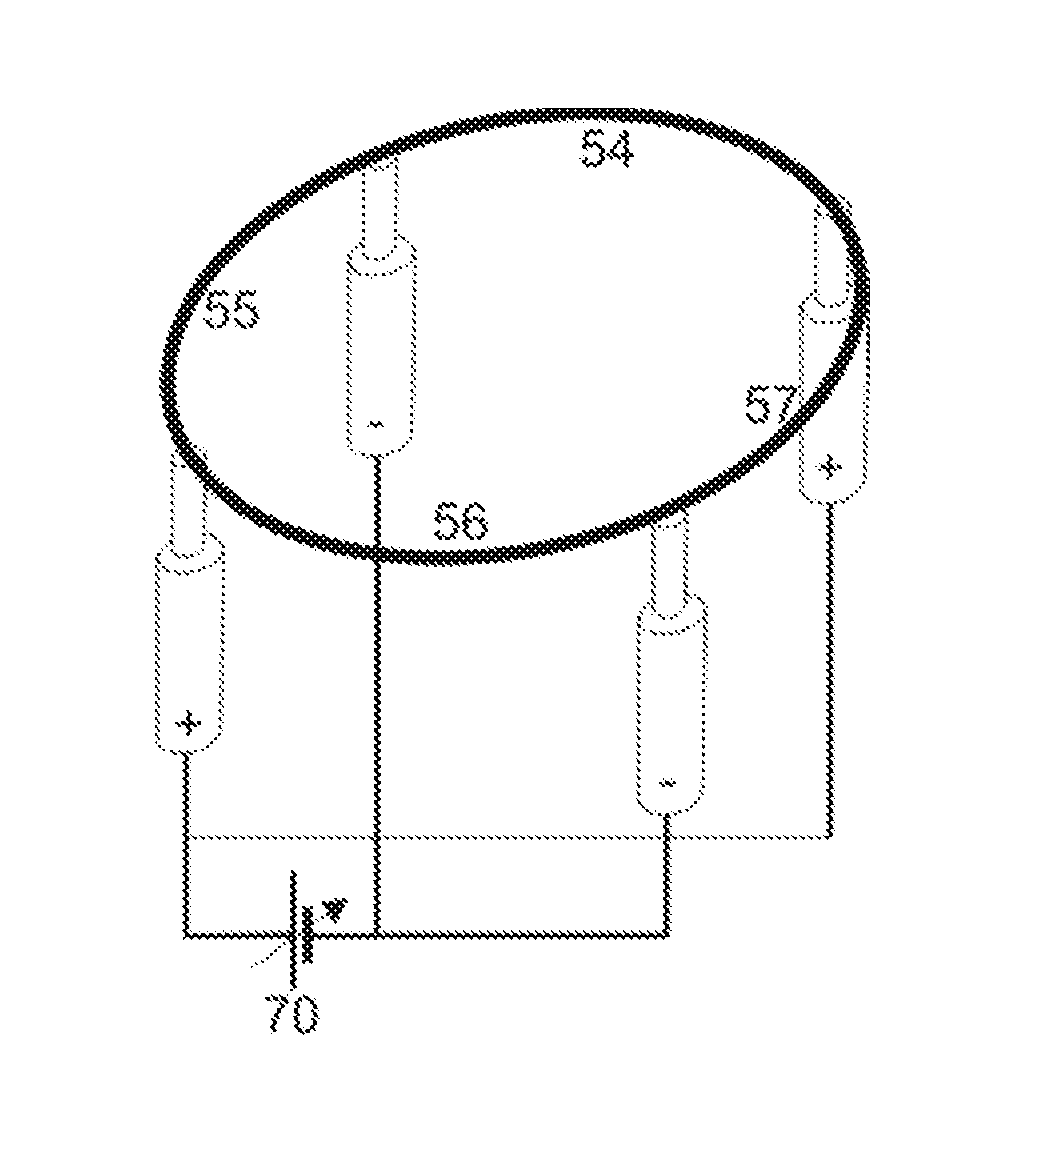 Filament for mass spectrometric electron impact ion source